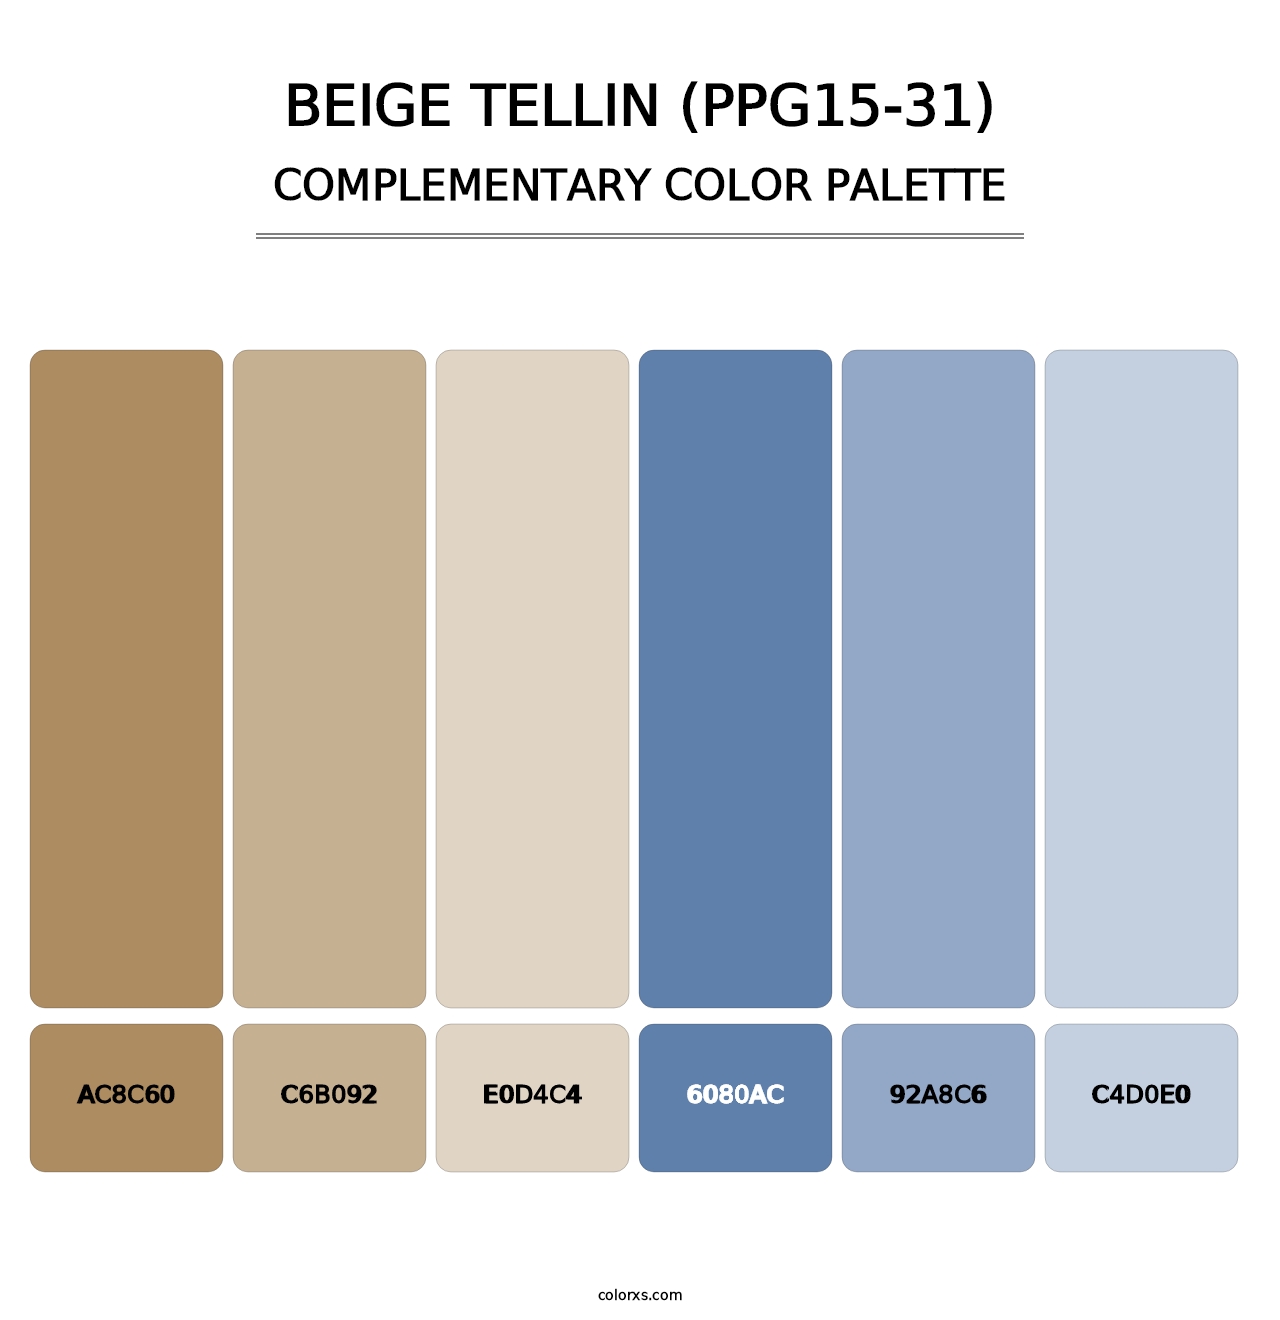 Beige Tellin (PPG15-31) - Complementary Color Palette